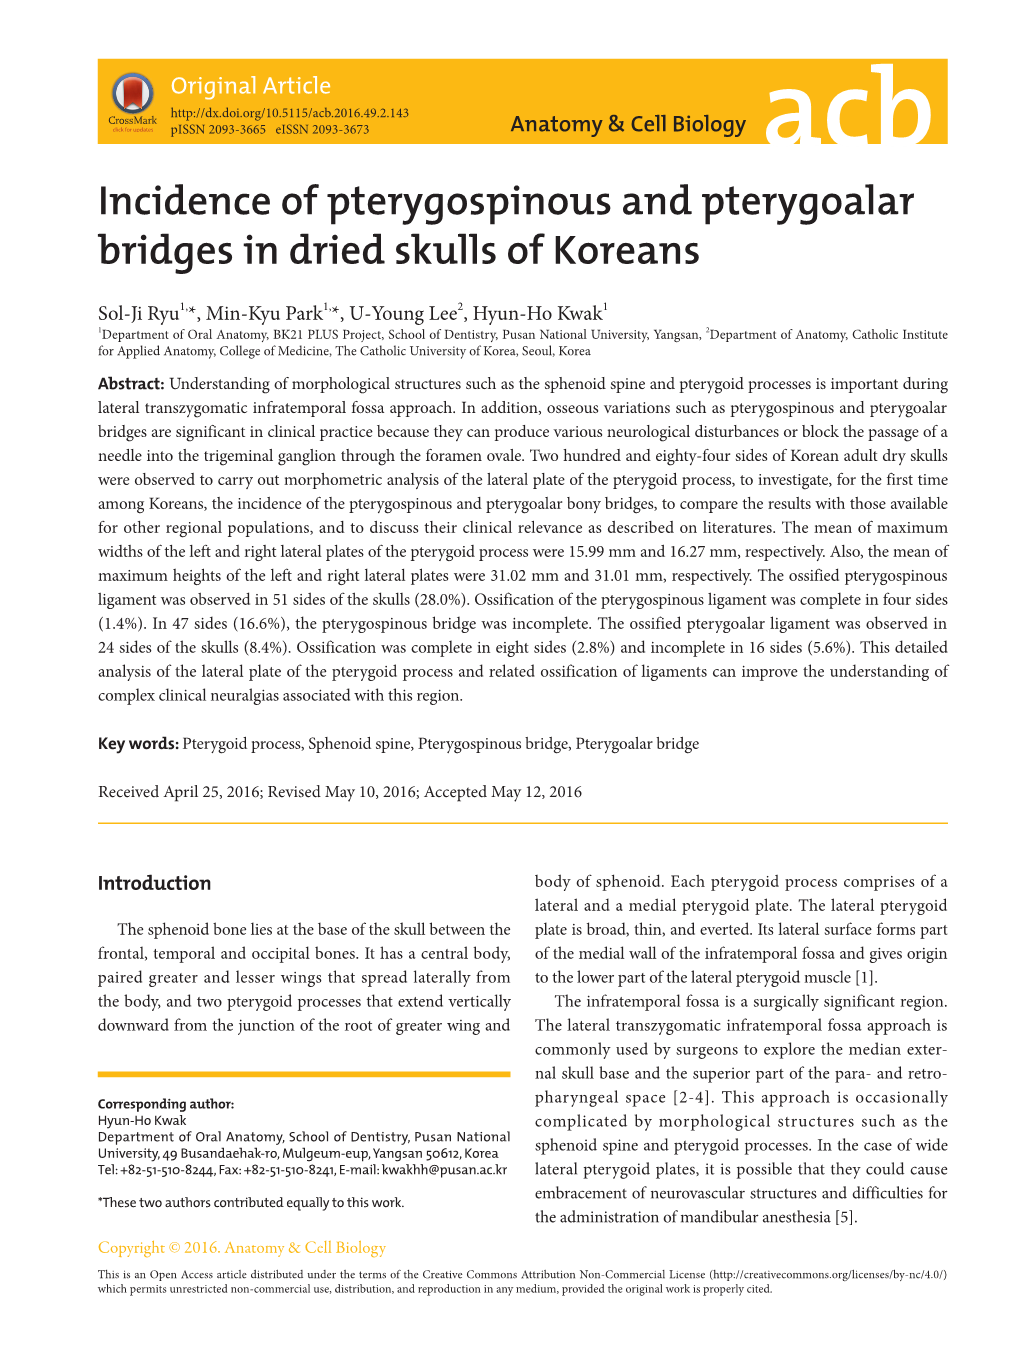 Incidence of Pterygospinous and Pterygoalar Bridges in Dried Skulls of Koreans